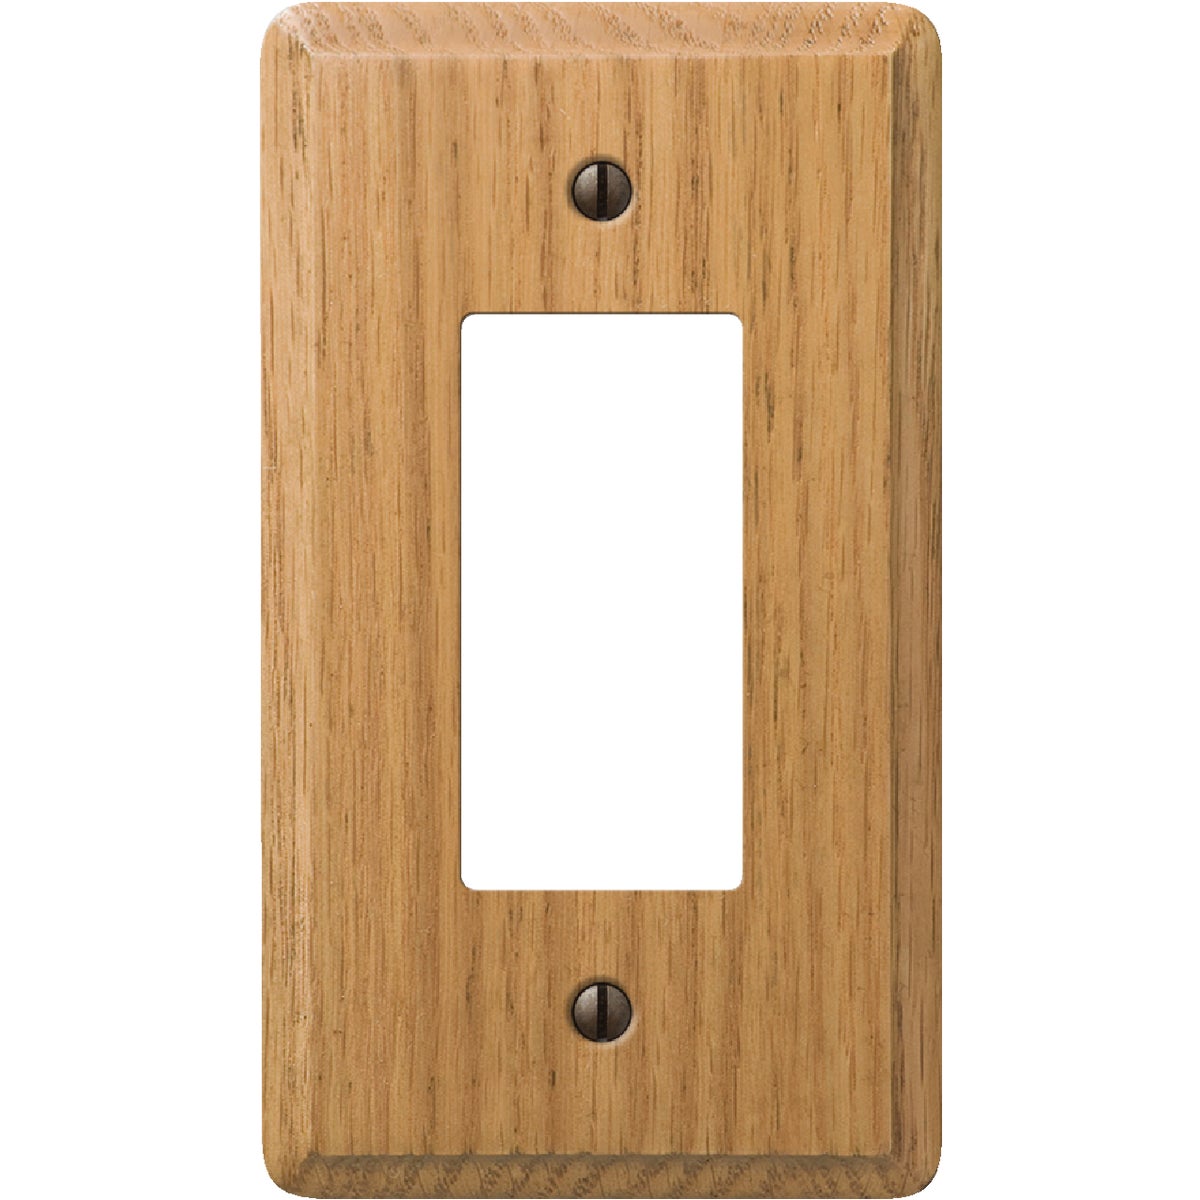 Item 551317, Solid wood GFCI (ground fault circuit interrupter) wall plate, contemporary